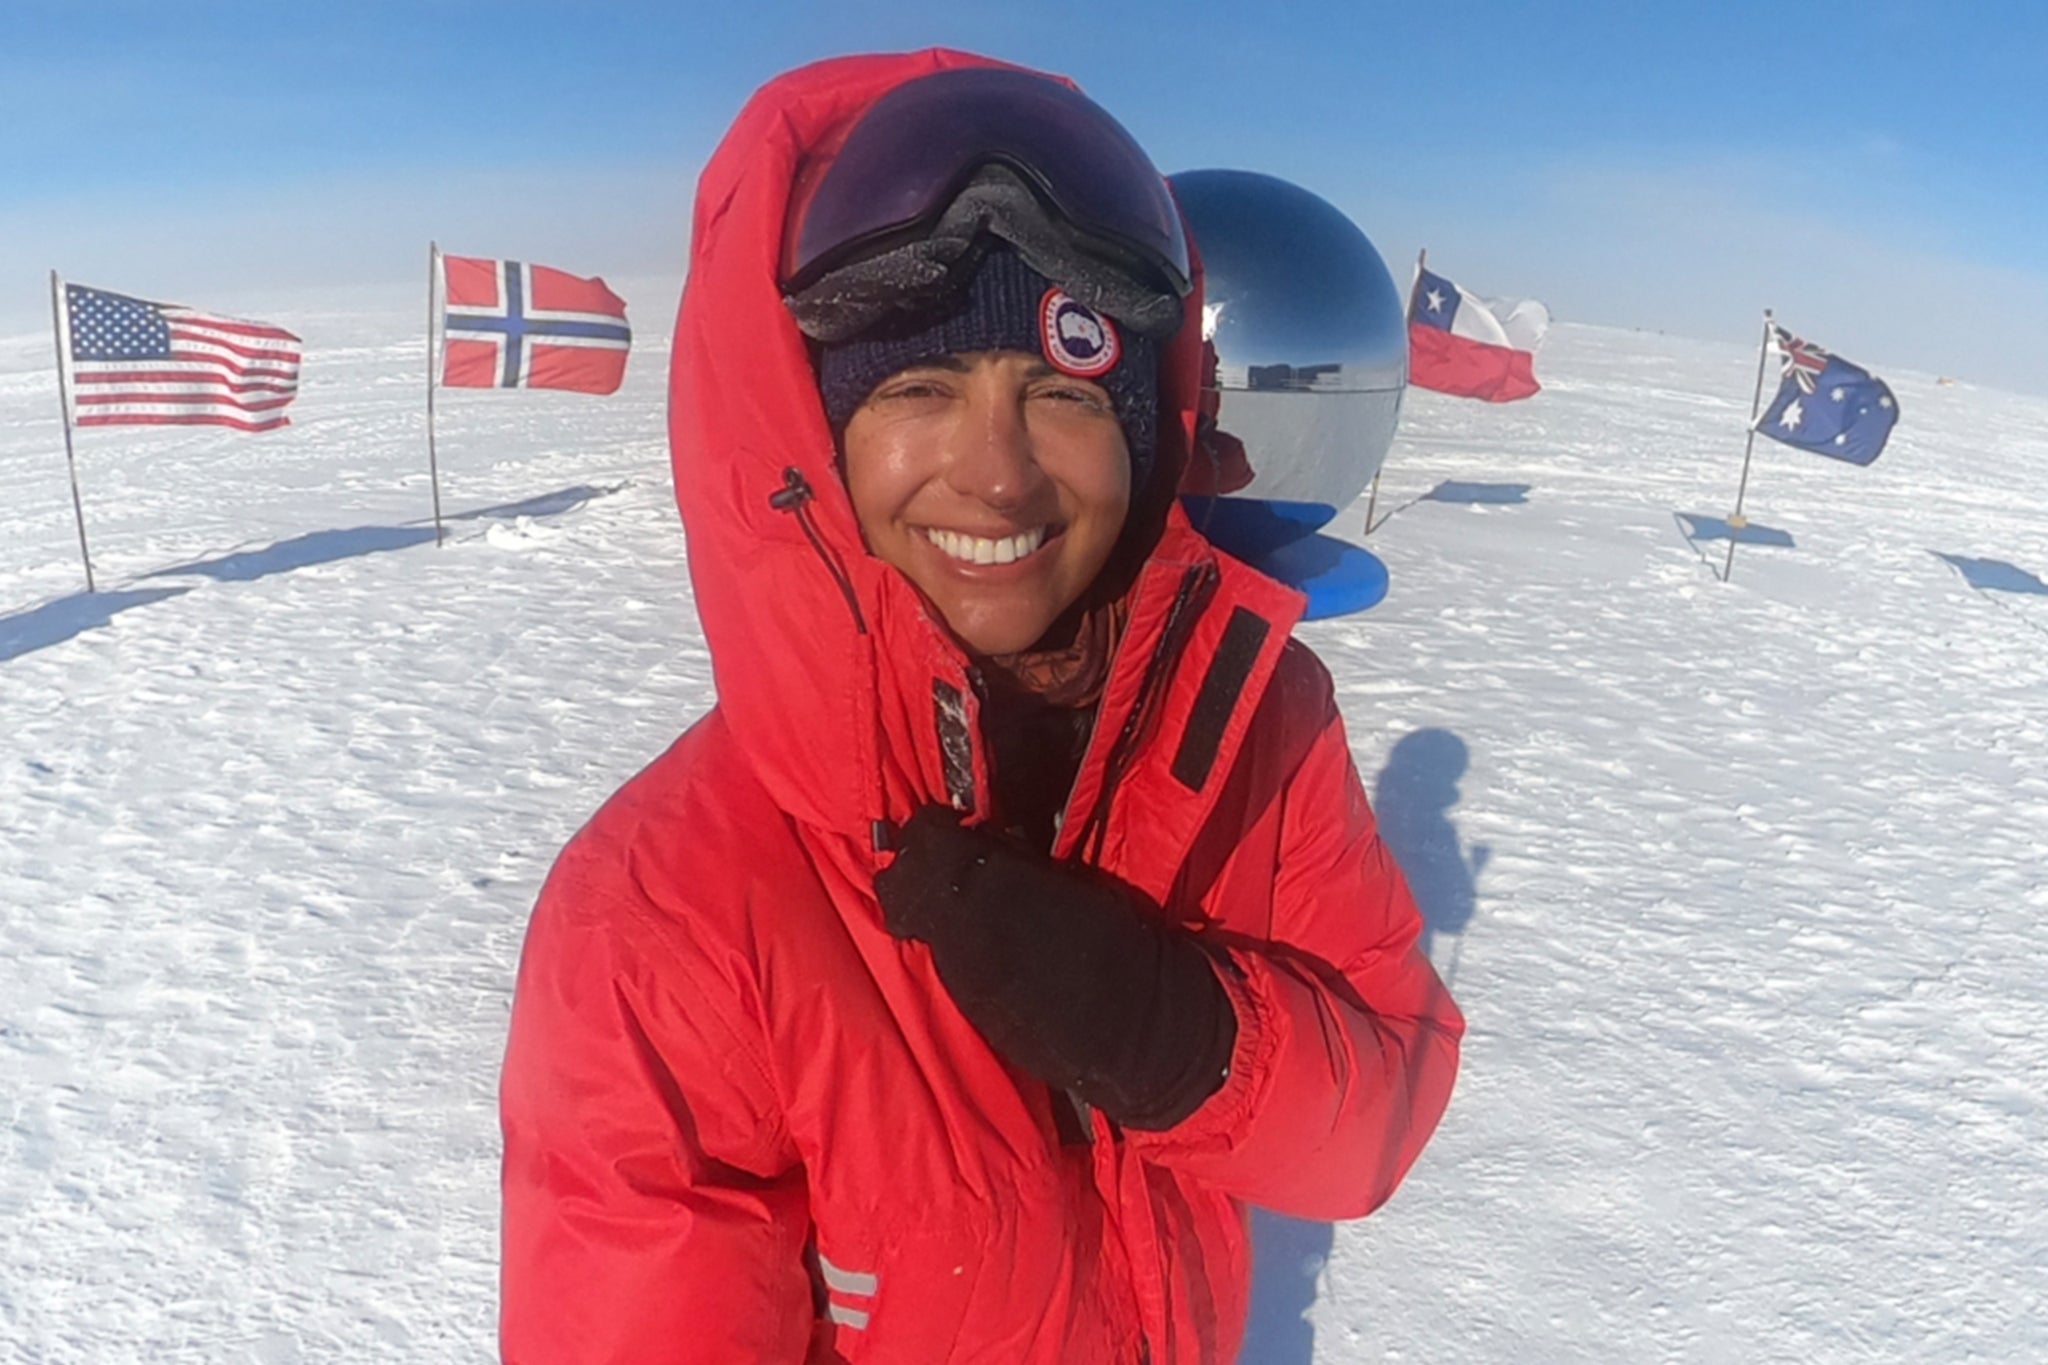 Captain Harpreet ‘Polar Preet’ Chandi covered the 1,130km of Antarctic ice in 31 days, 13 hours and 19 minutes